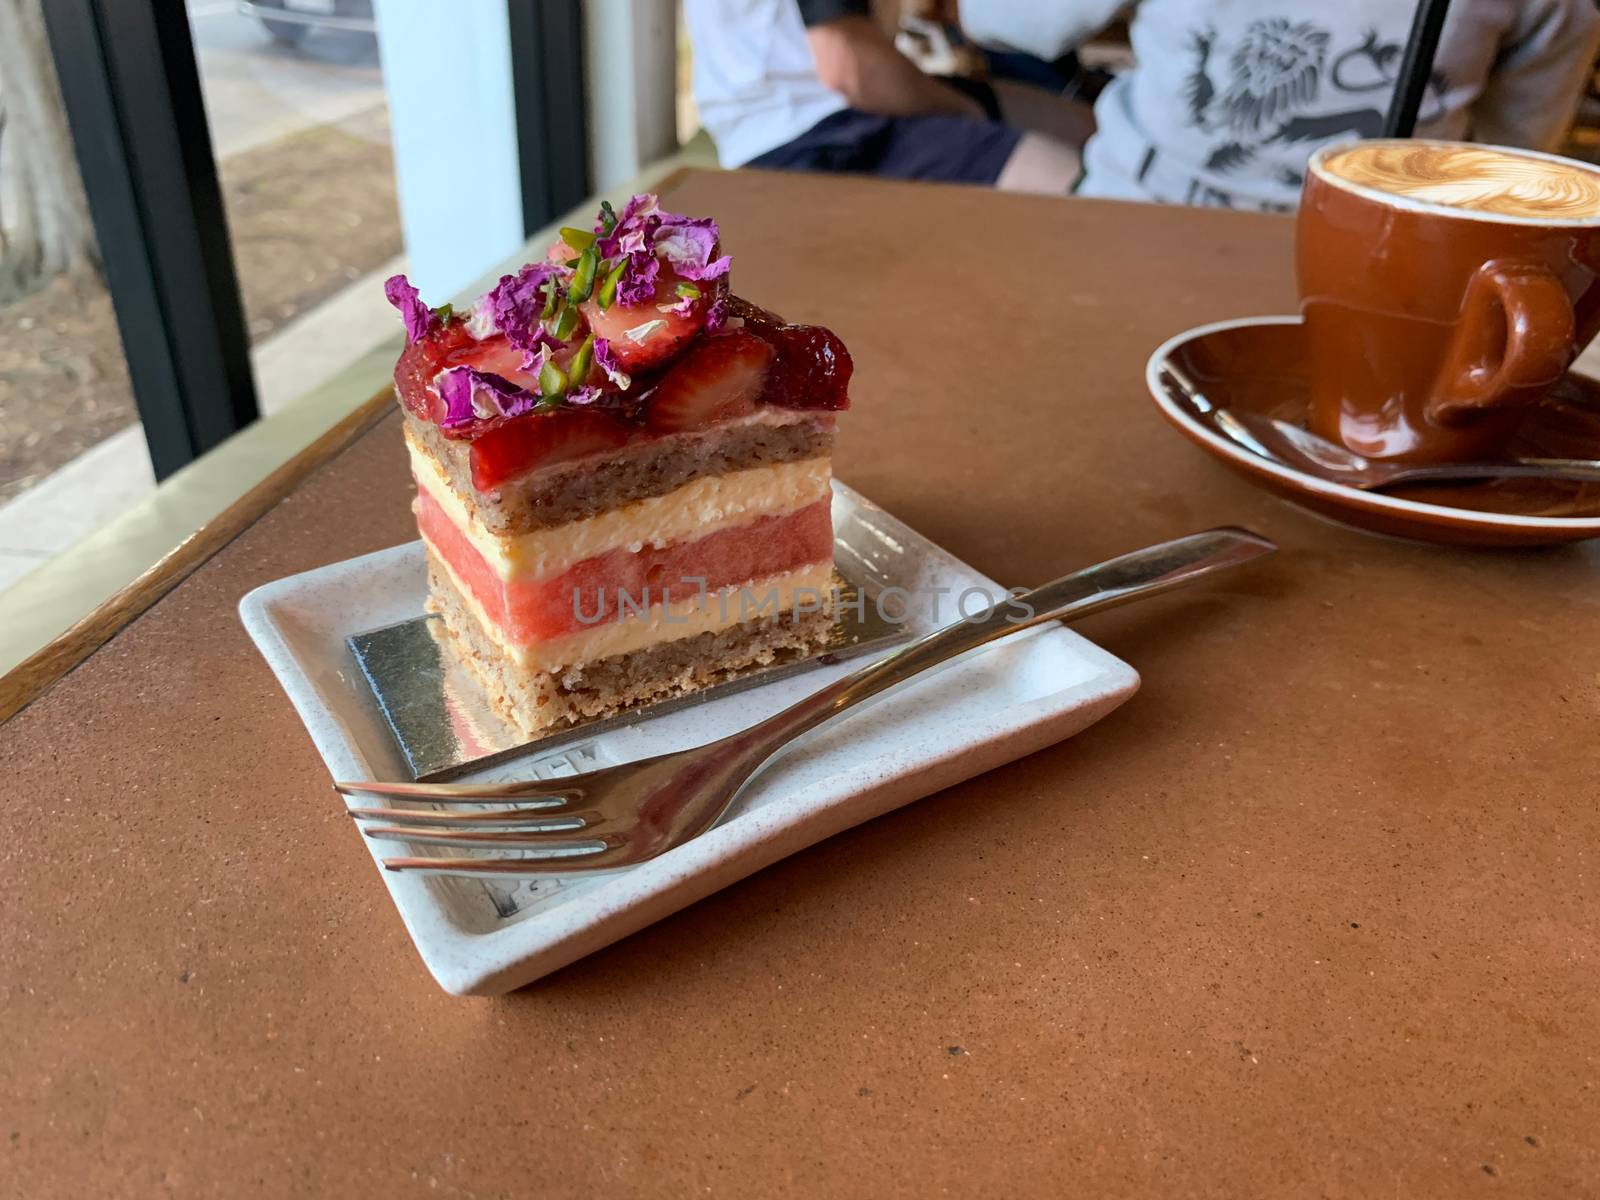 Straberry and watermelon layer cake with a cappuccino in a cafe